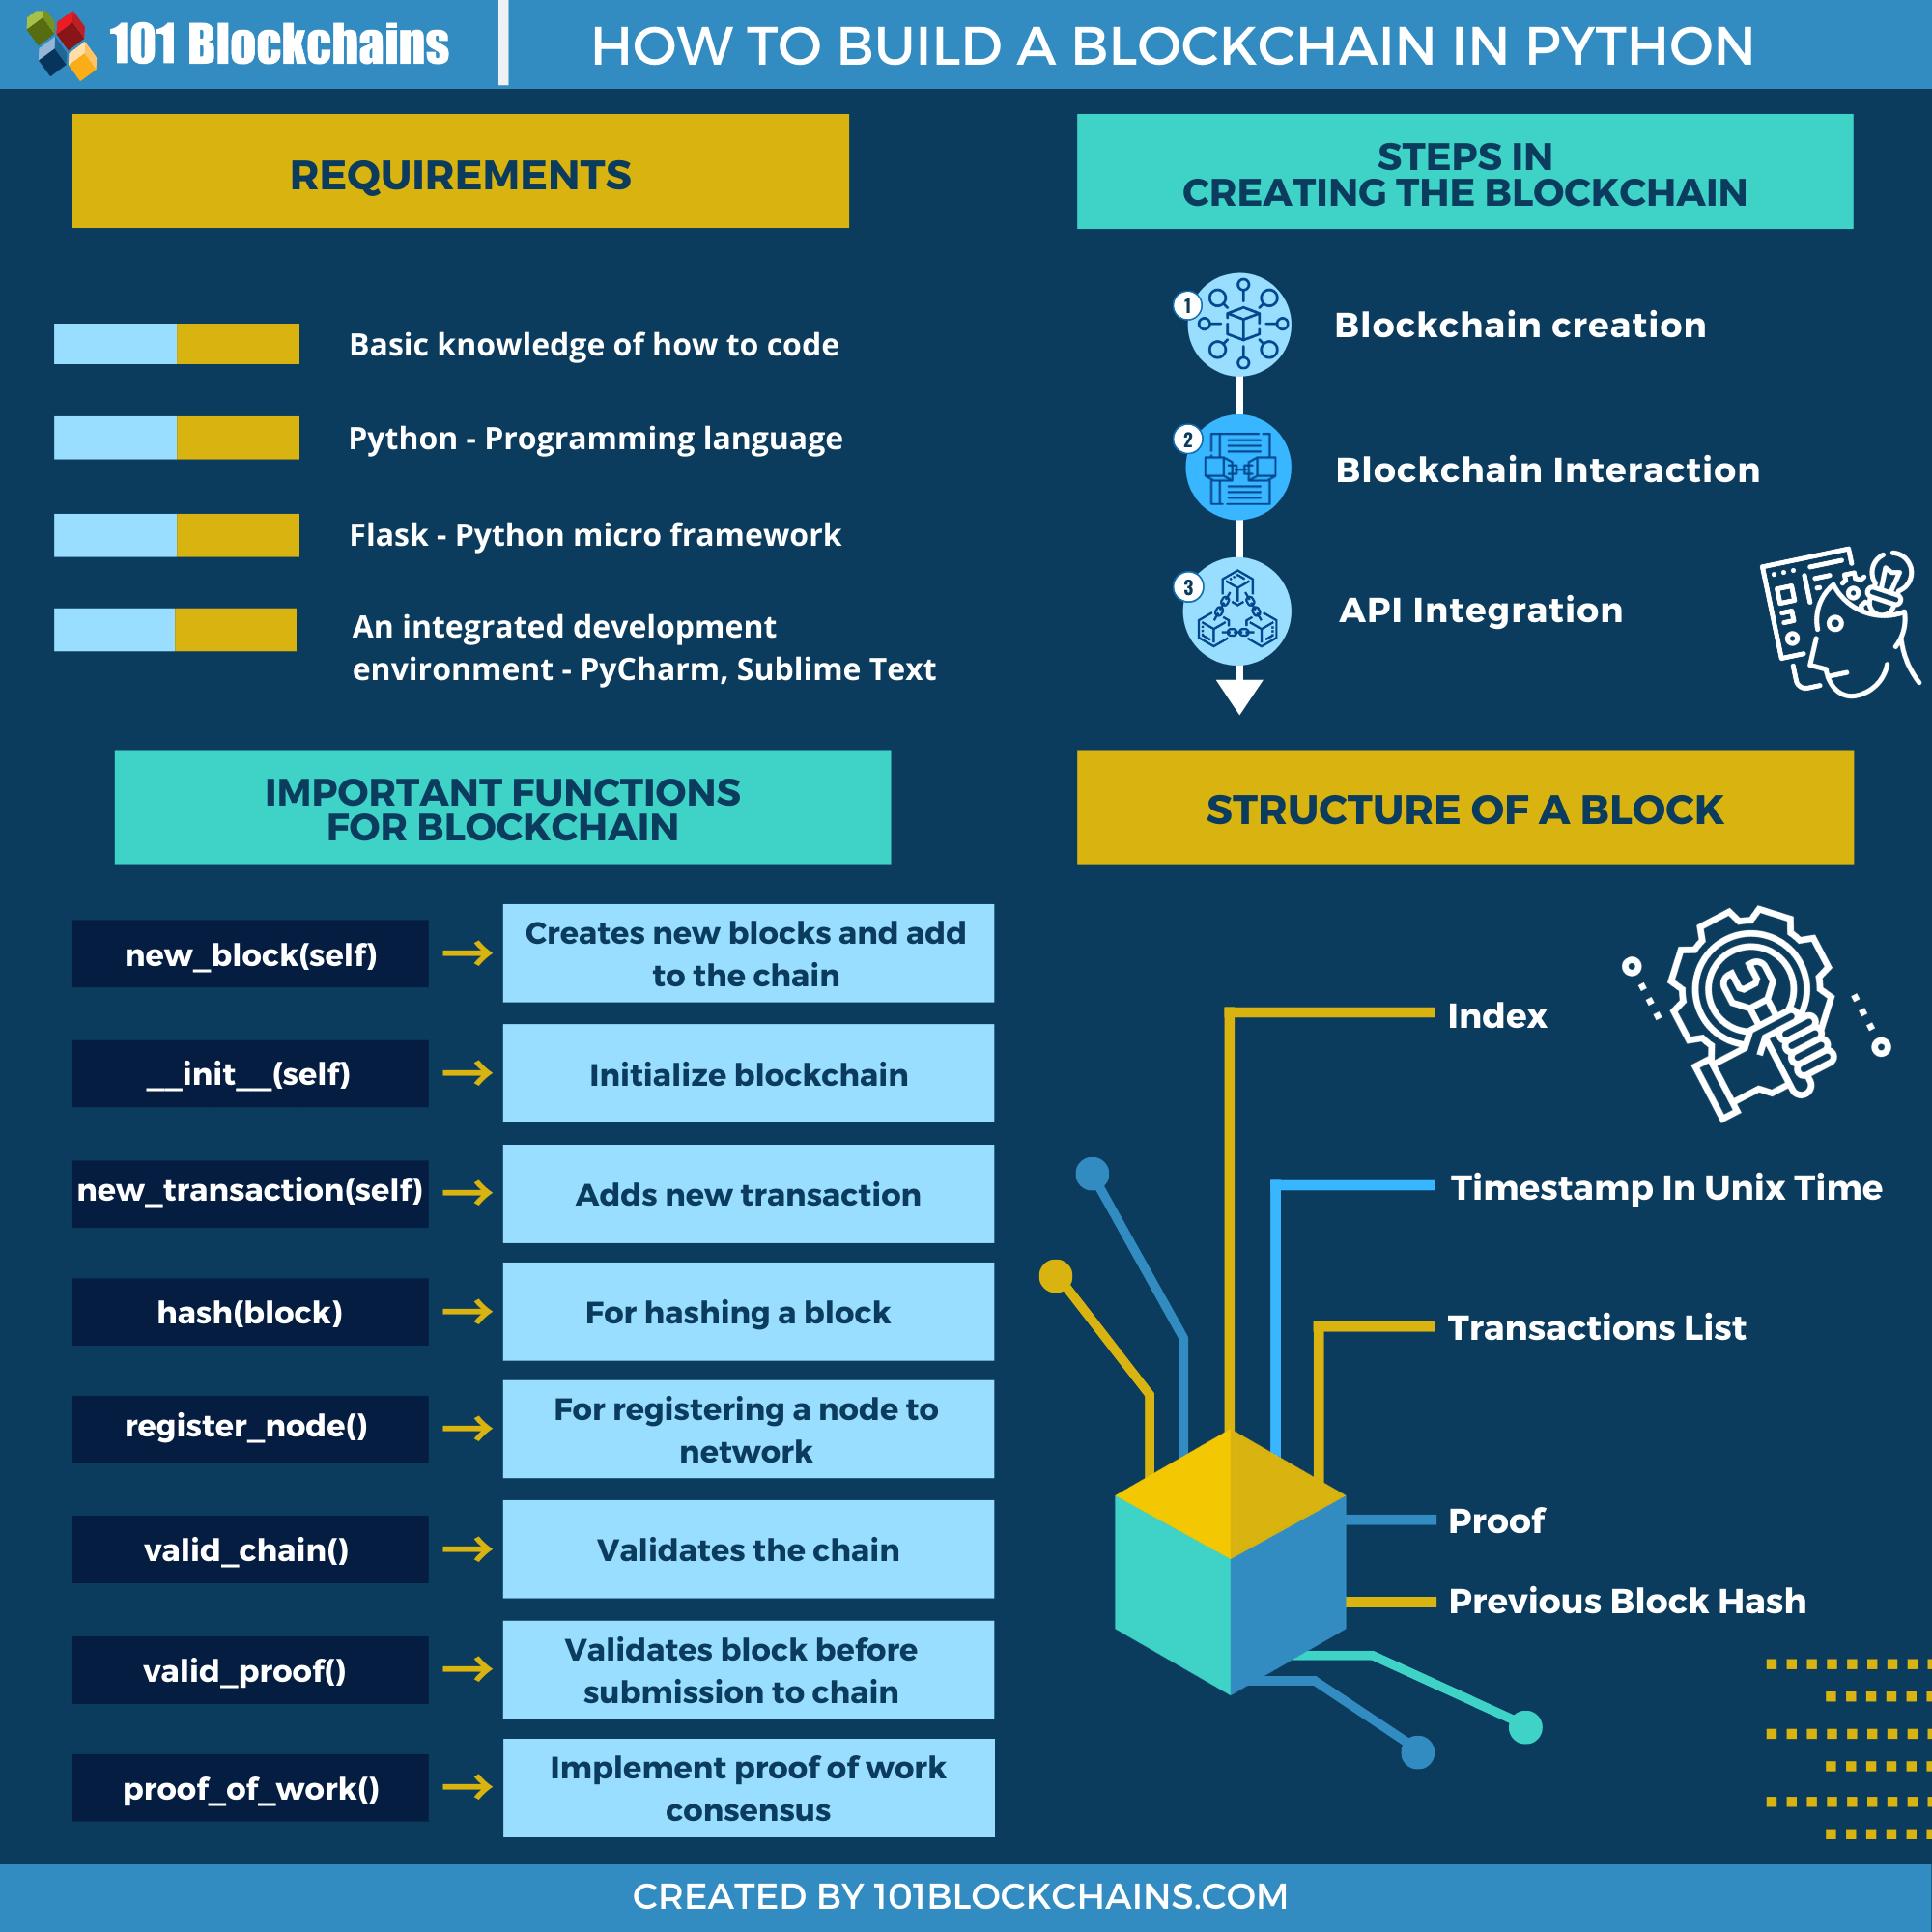 How to Build a Blockchain